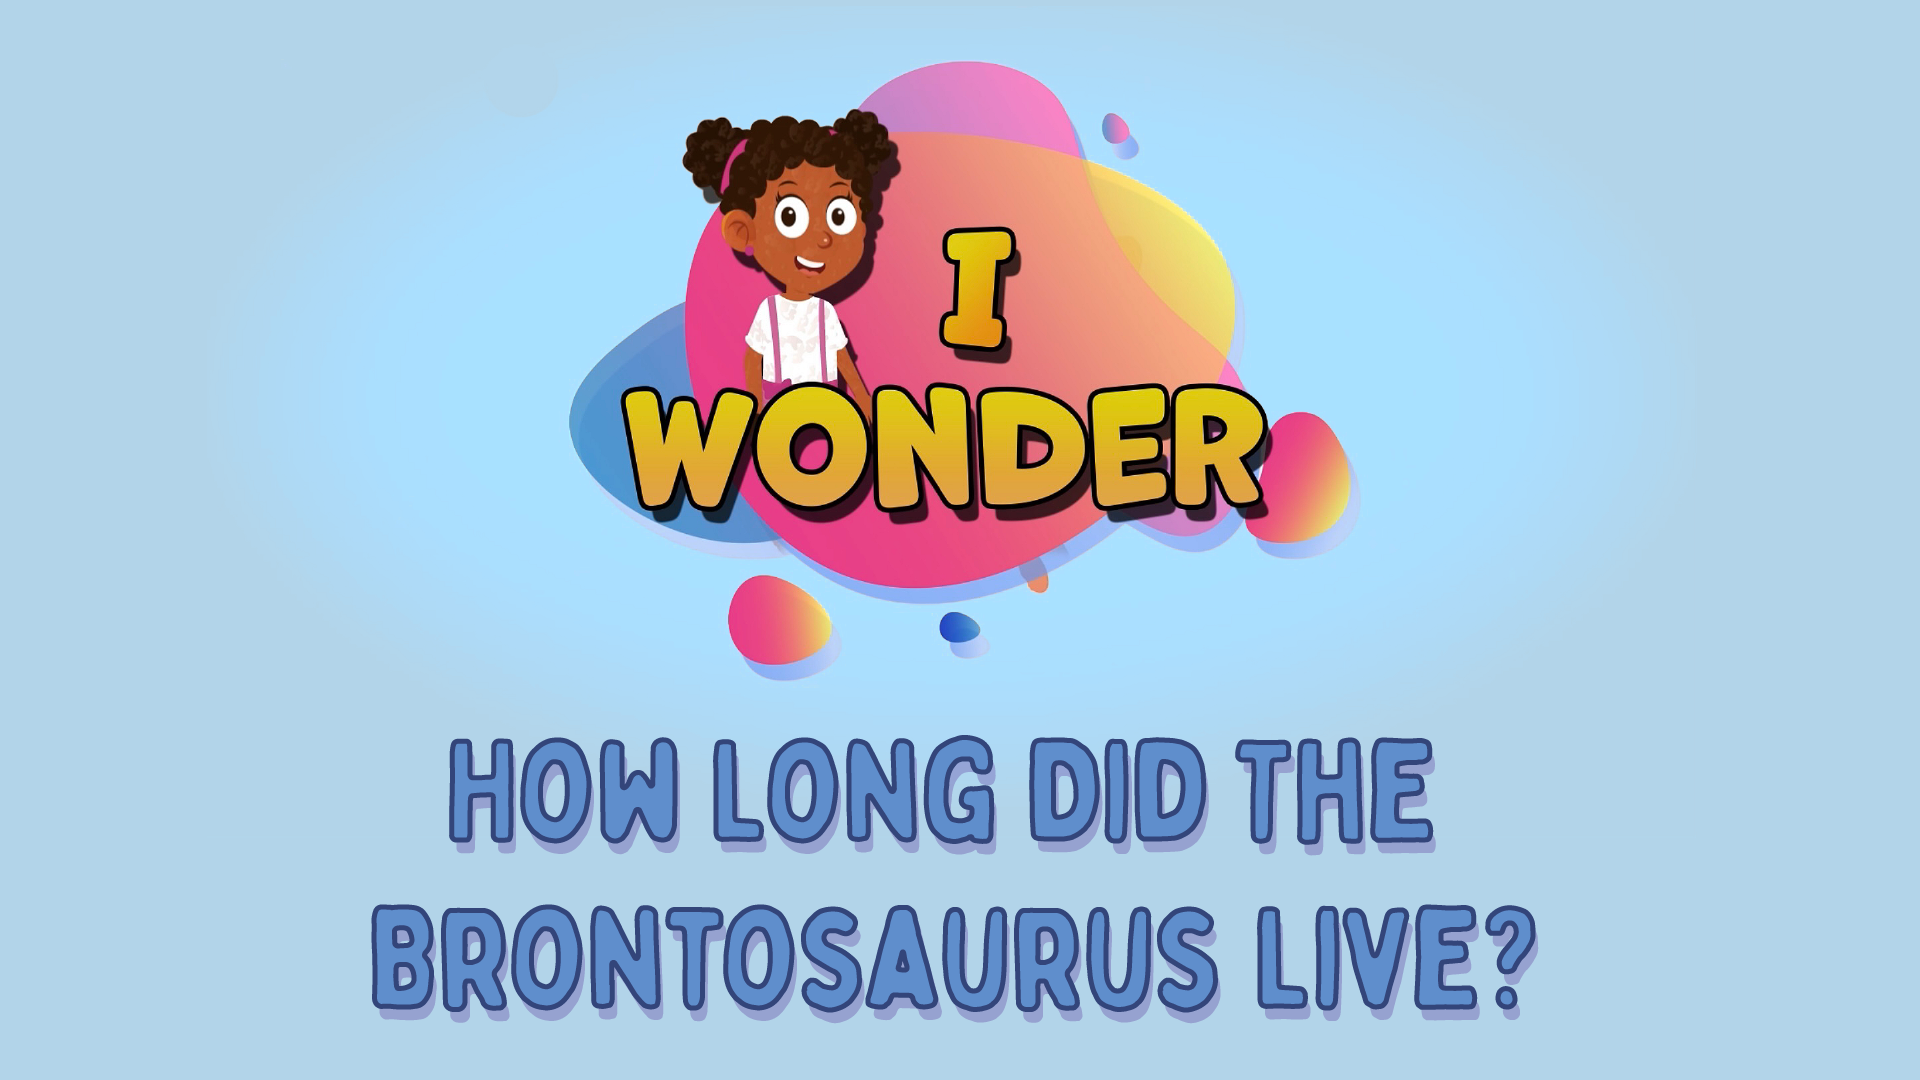 How Long Did The Brontosaurus Live?